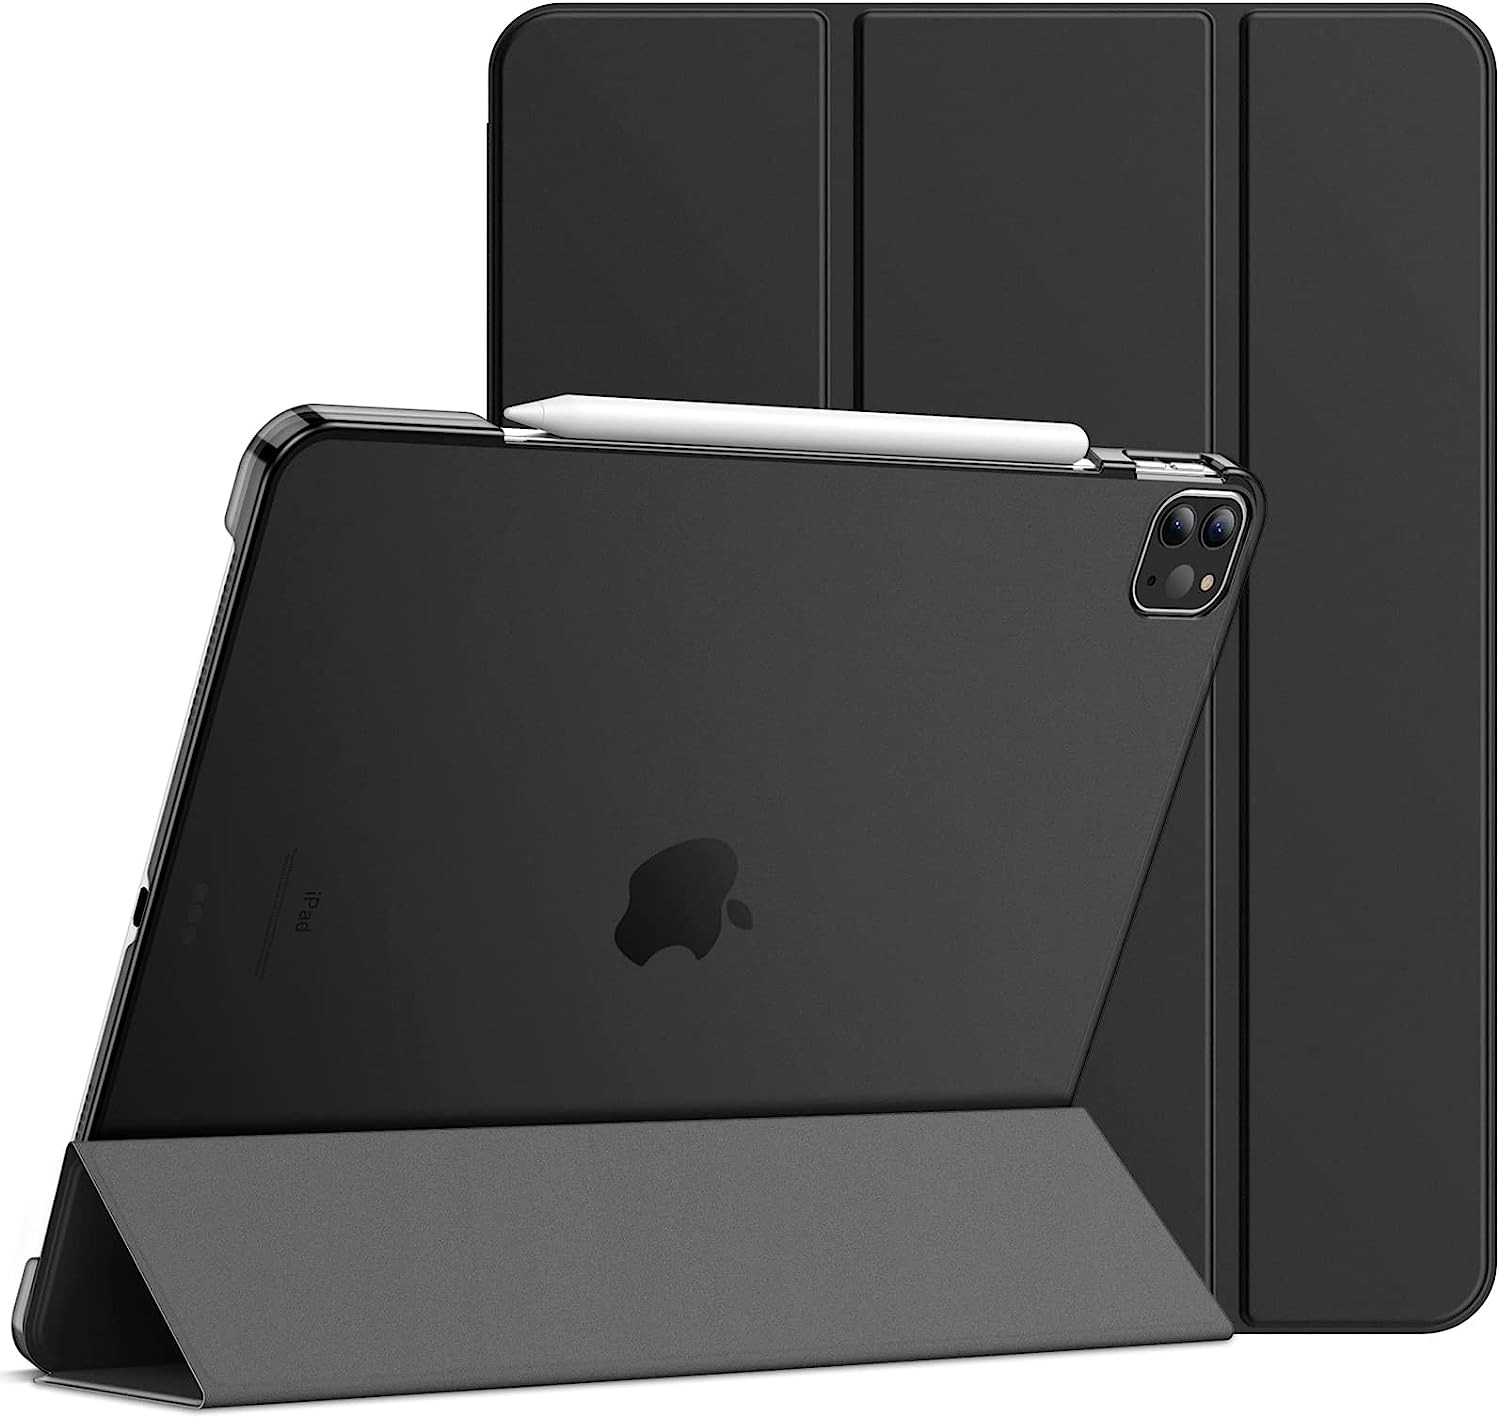 Case for Ipad Pro 12.9-Inch (2020/2018 Model, 4Th/3Rd Generation), Compatible wi